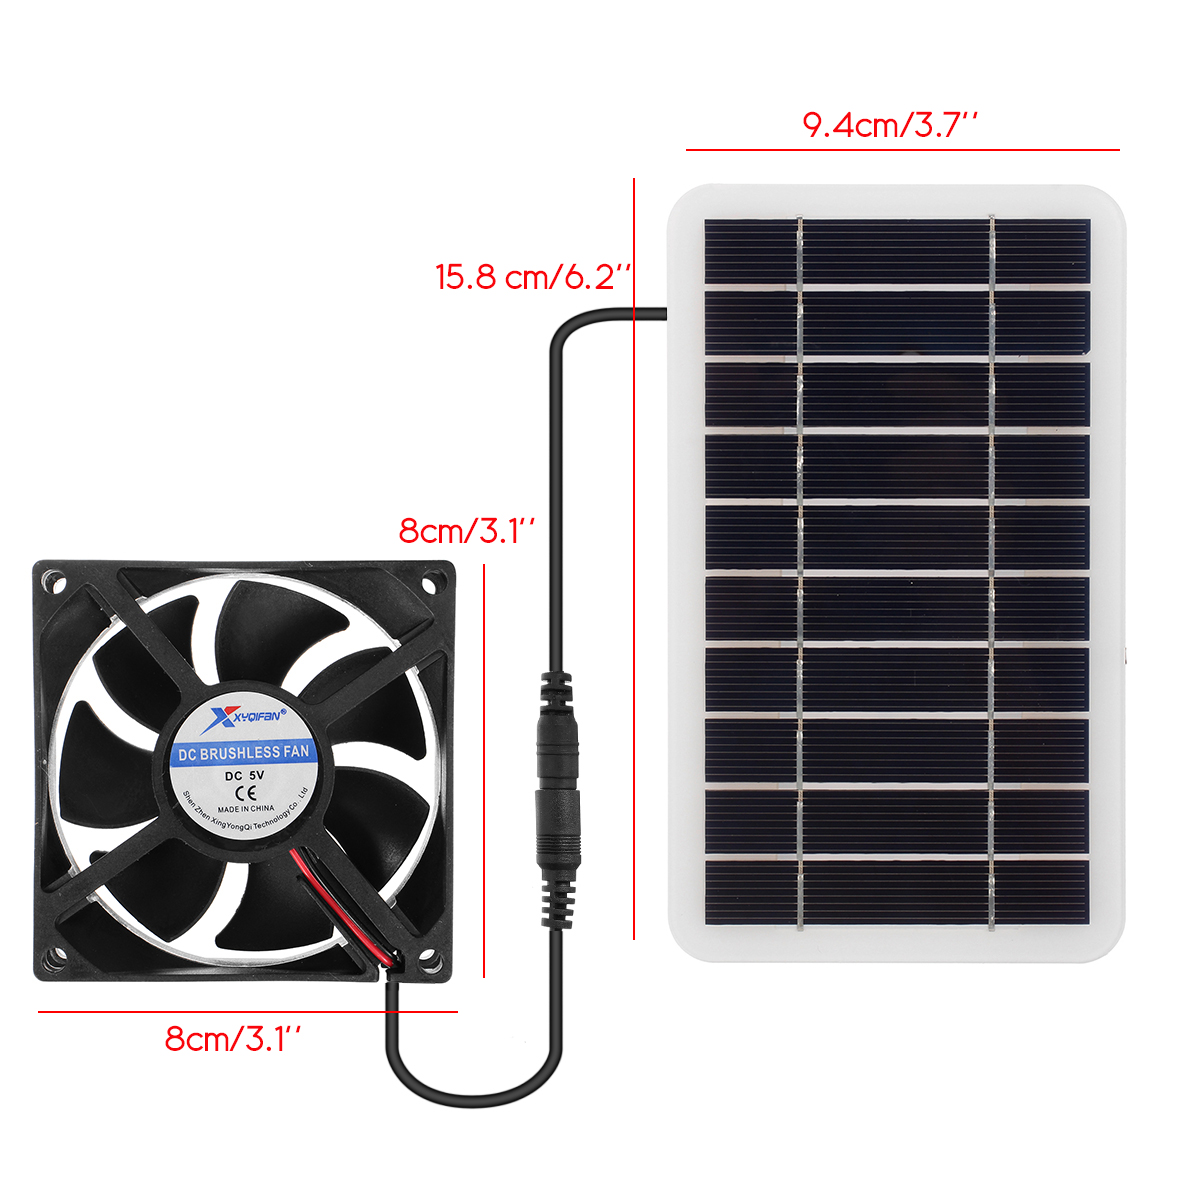 100W-Portable-Solar-Panel-Kit-Dual-DC-5V-USB-Charger-Kit-Solar-Power-Controller-with-Fans-1905897-3